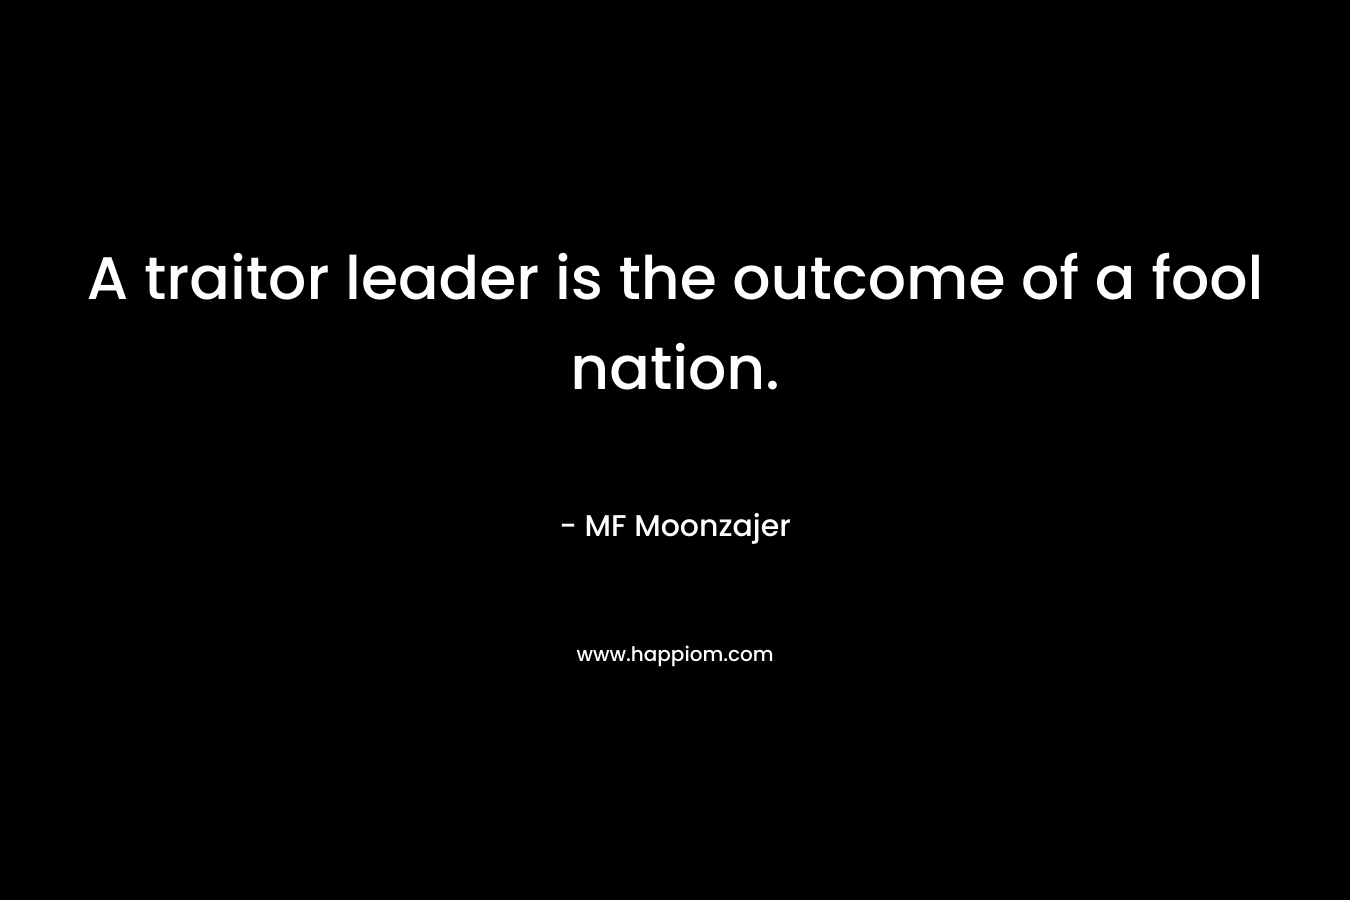 A traitor leader is the outcome of a fool nation. – MF Moonzajer